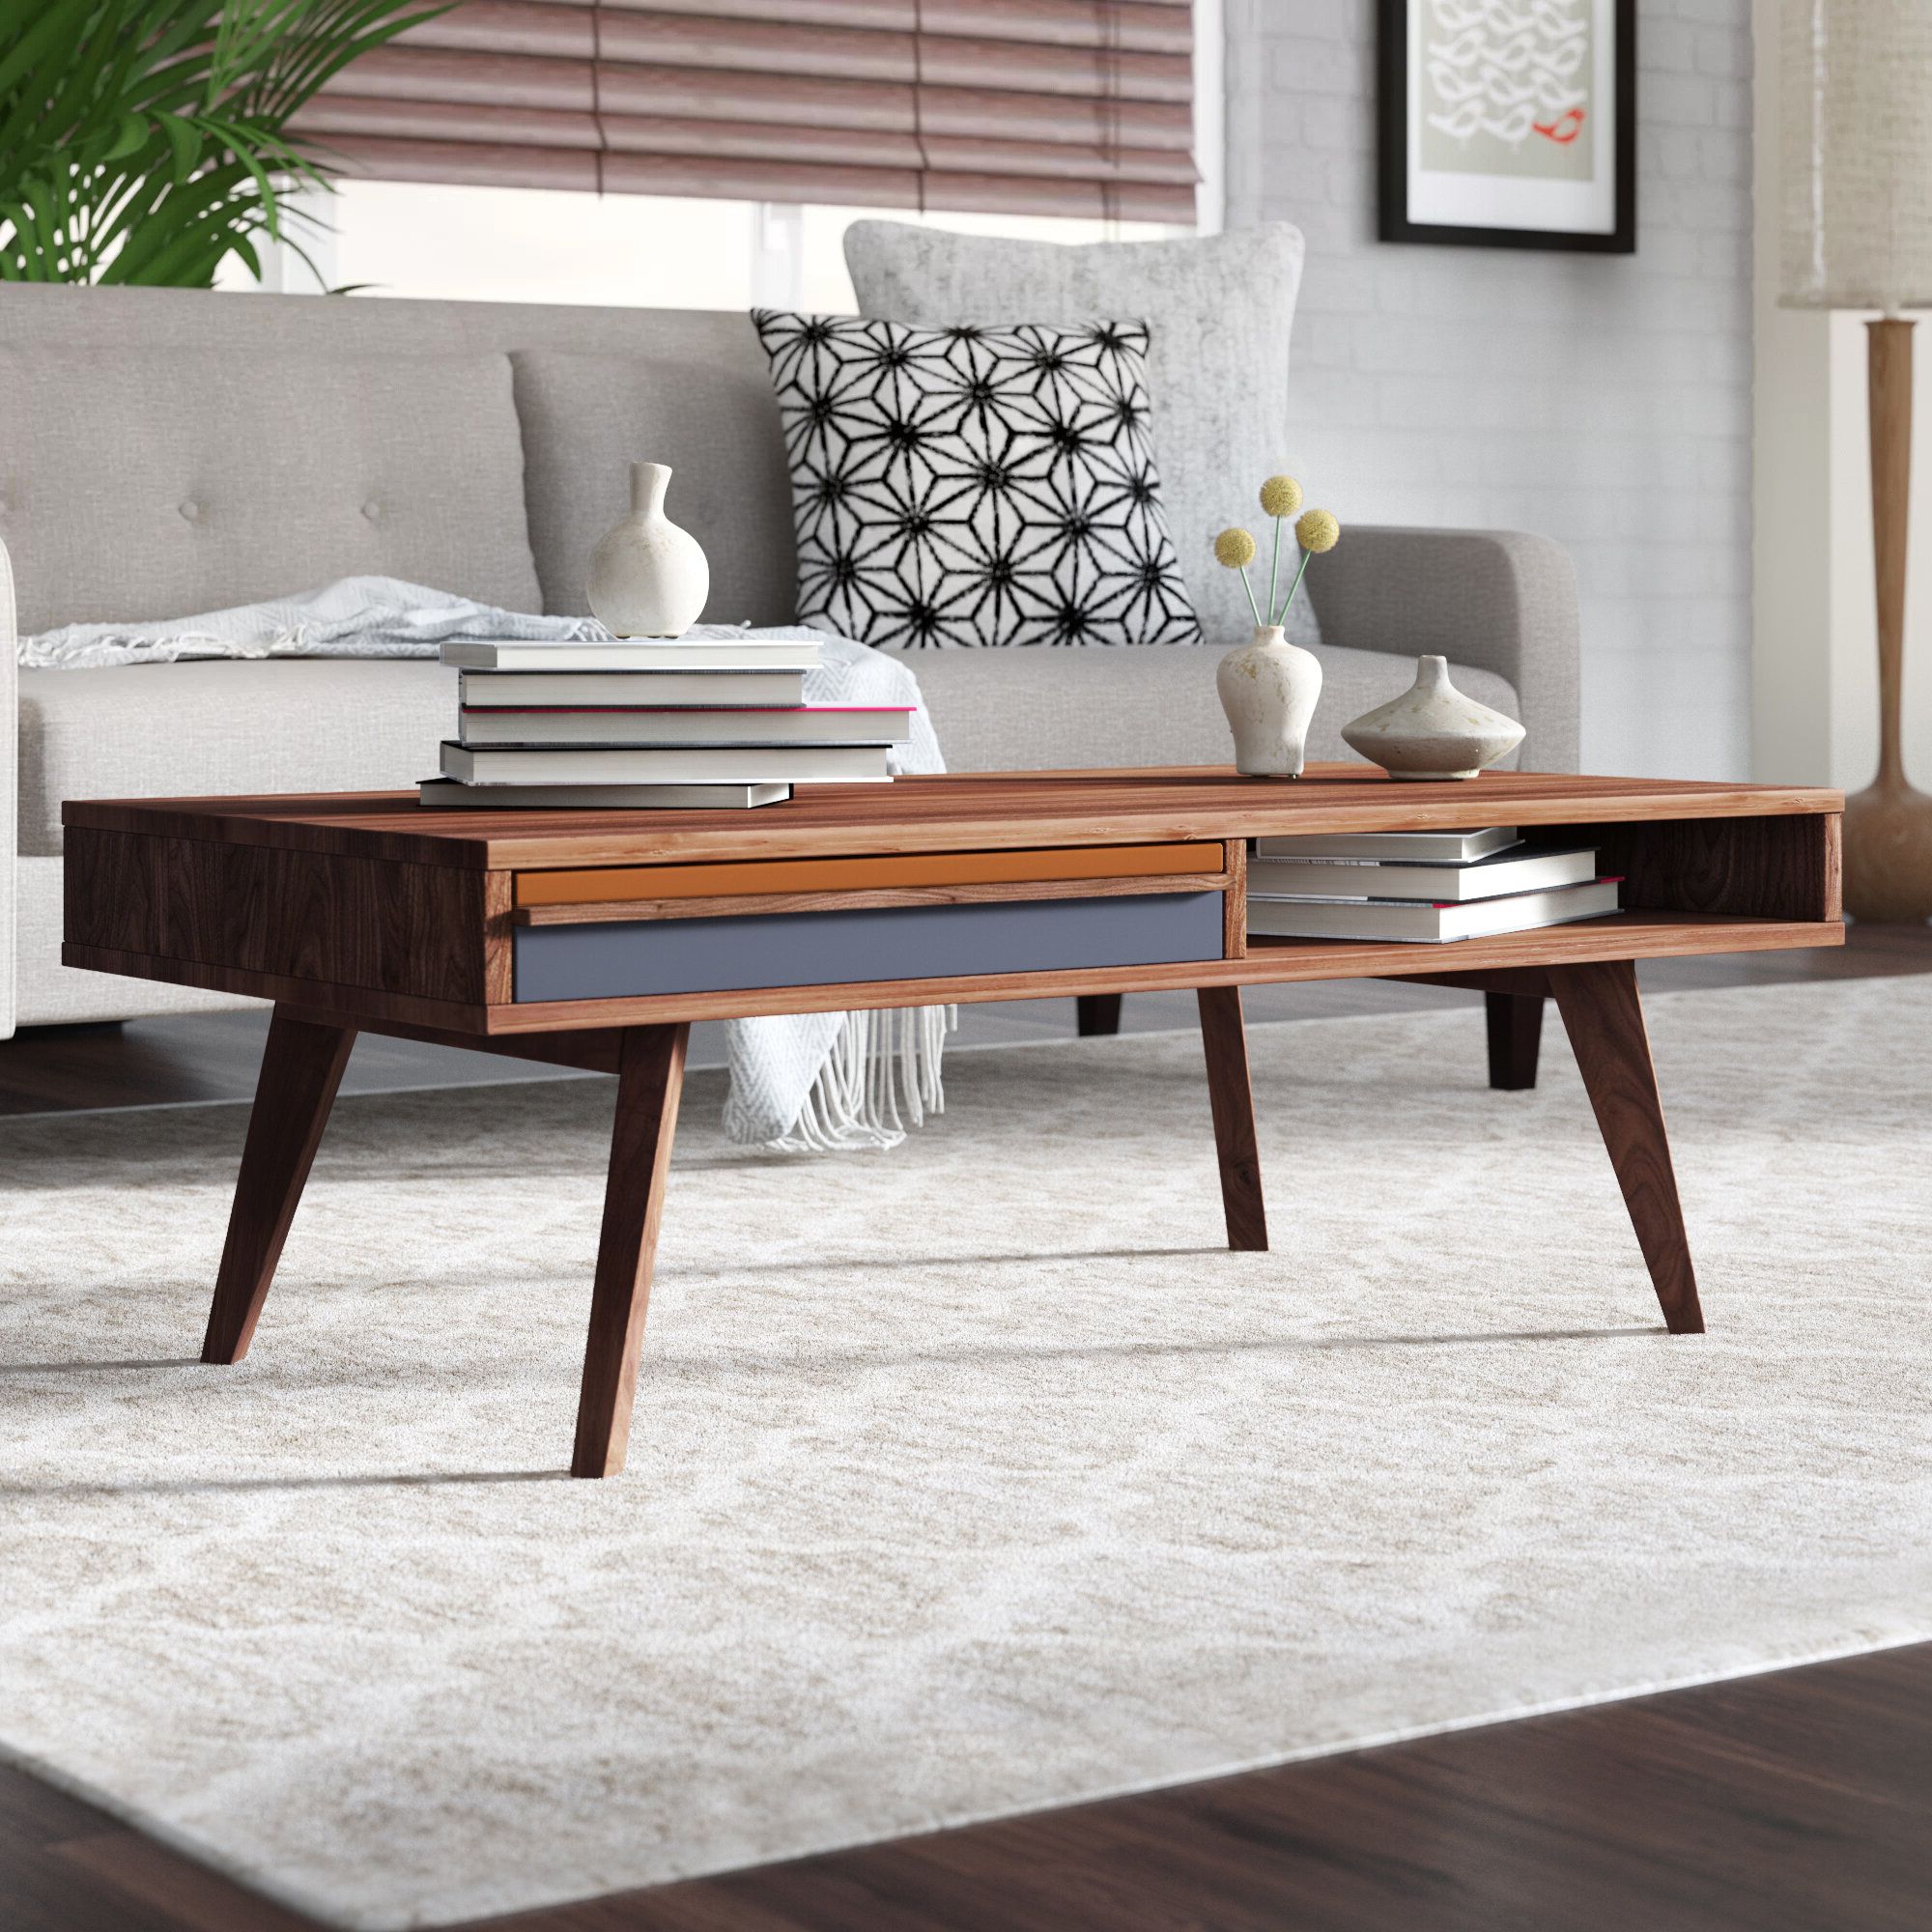 2020 Mid Century Modern Coffee Table – Ideas On Foter Regarding Modern Wooden X Design Coffee Tables (View 12 of 15)